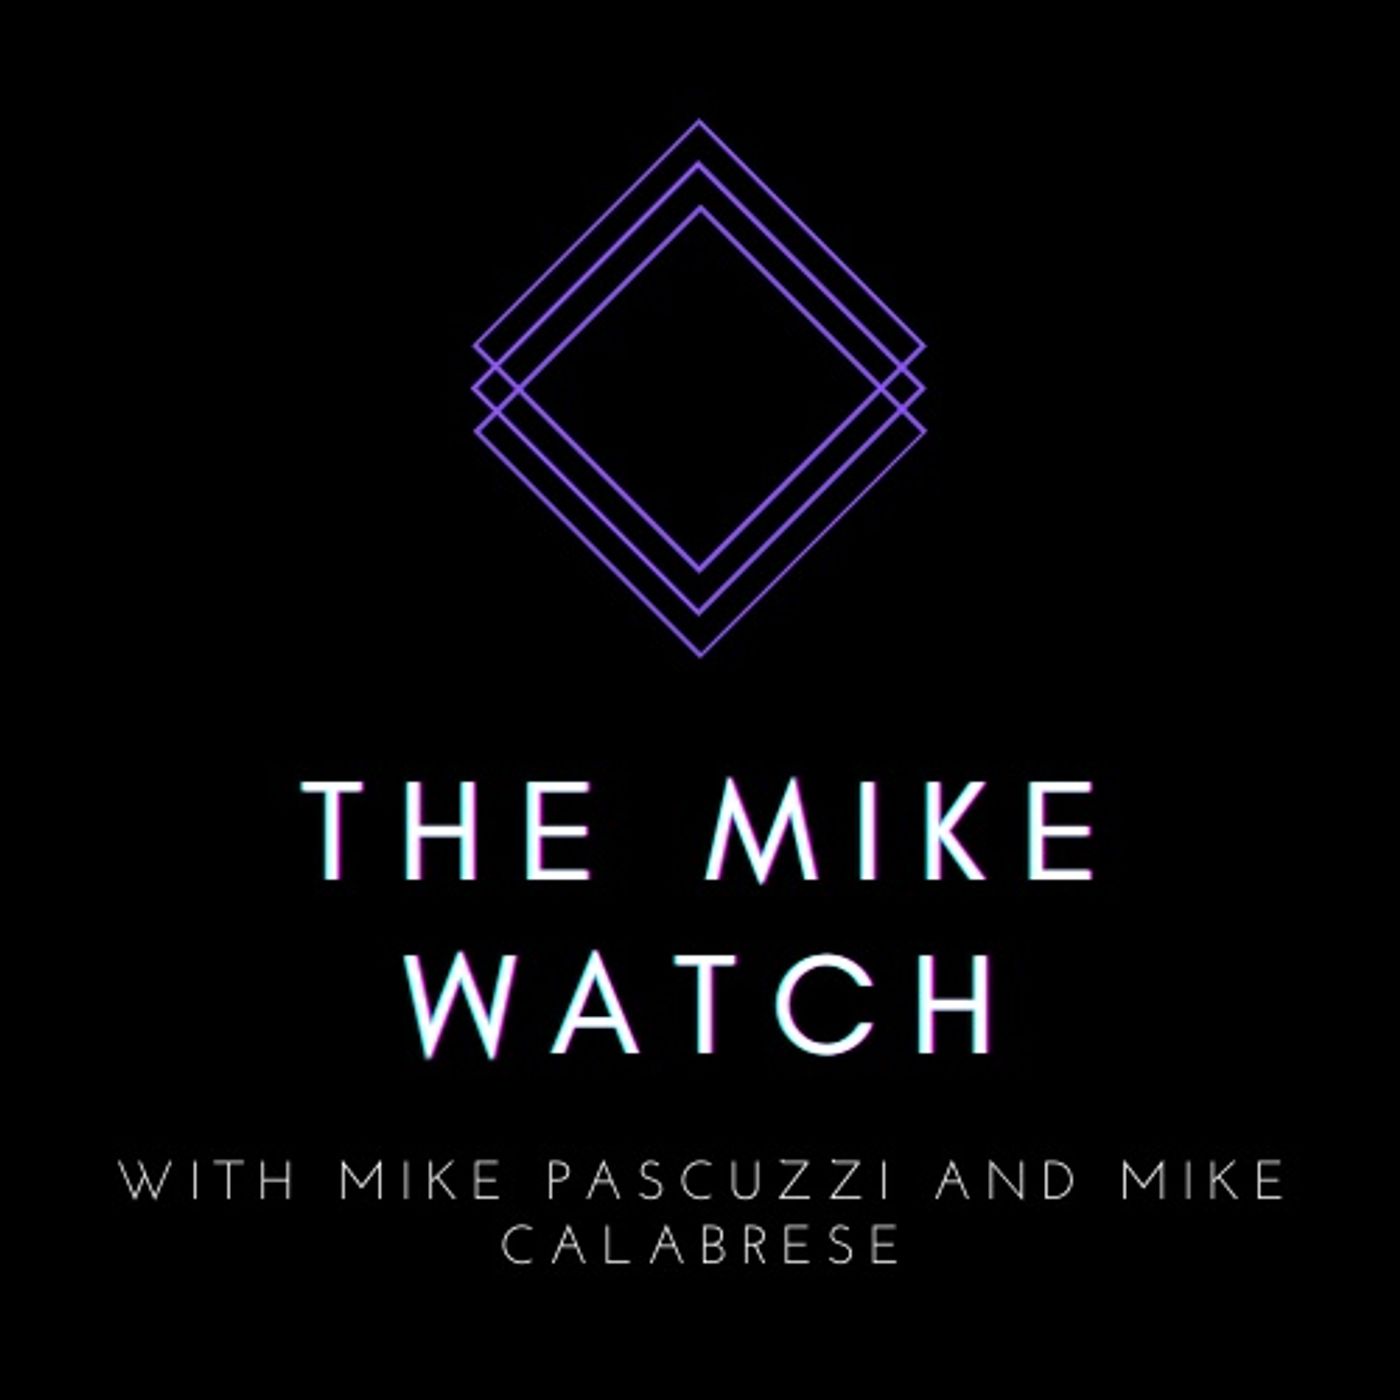 THE MIKE WATCH